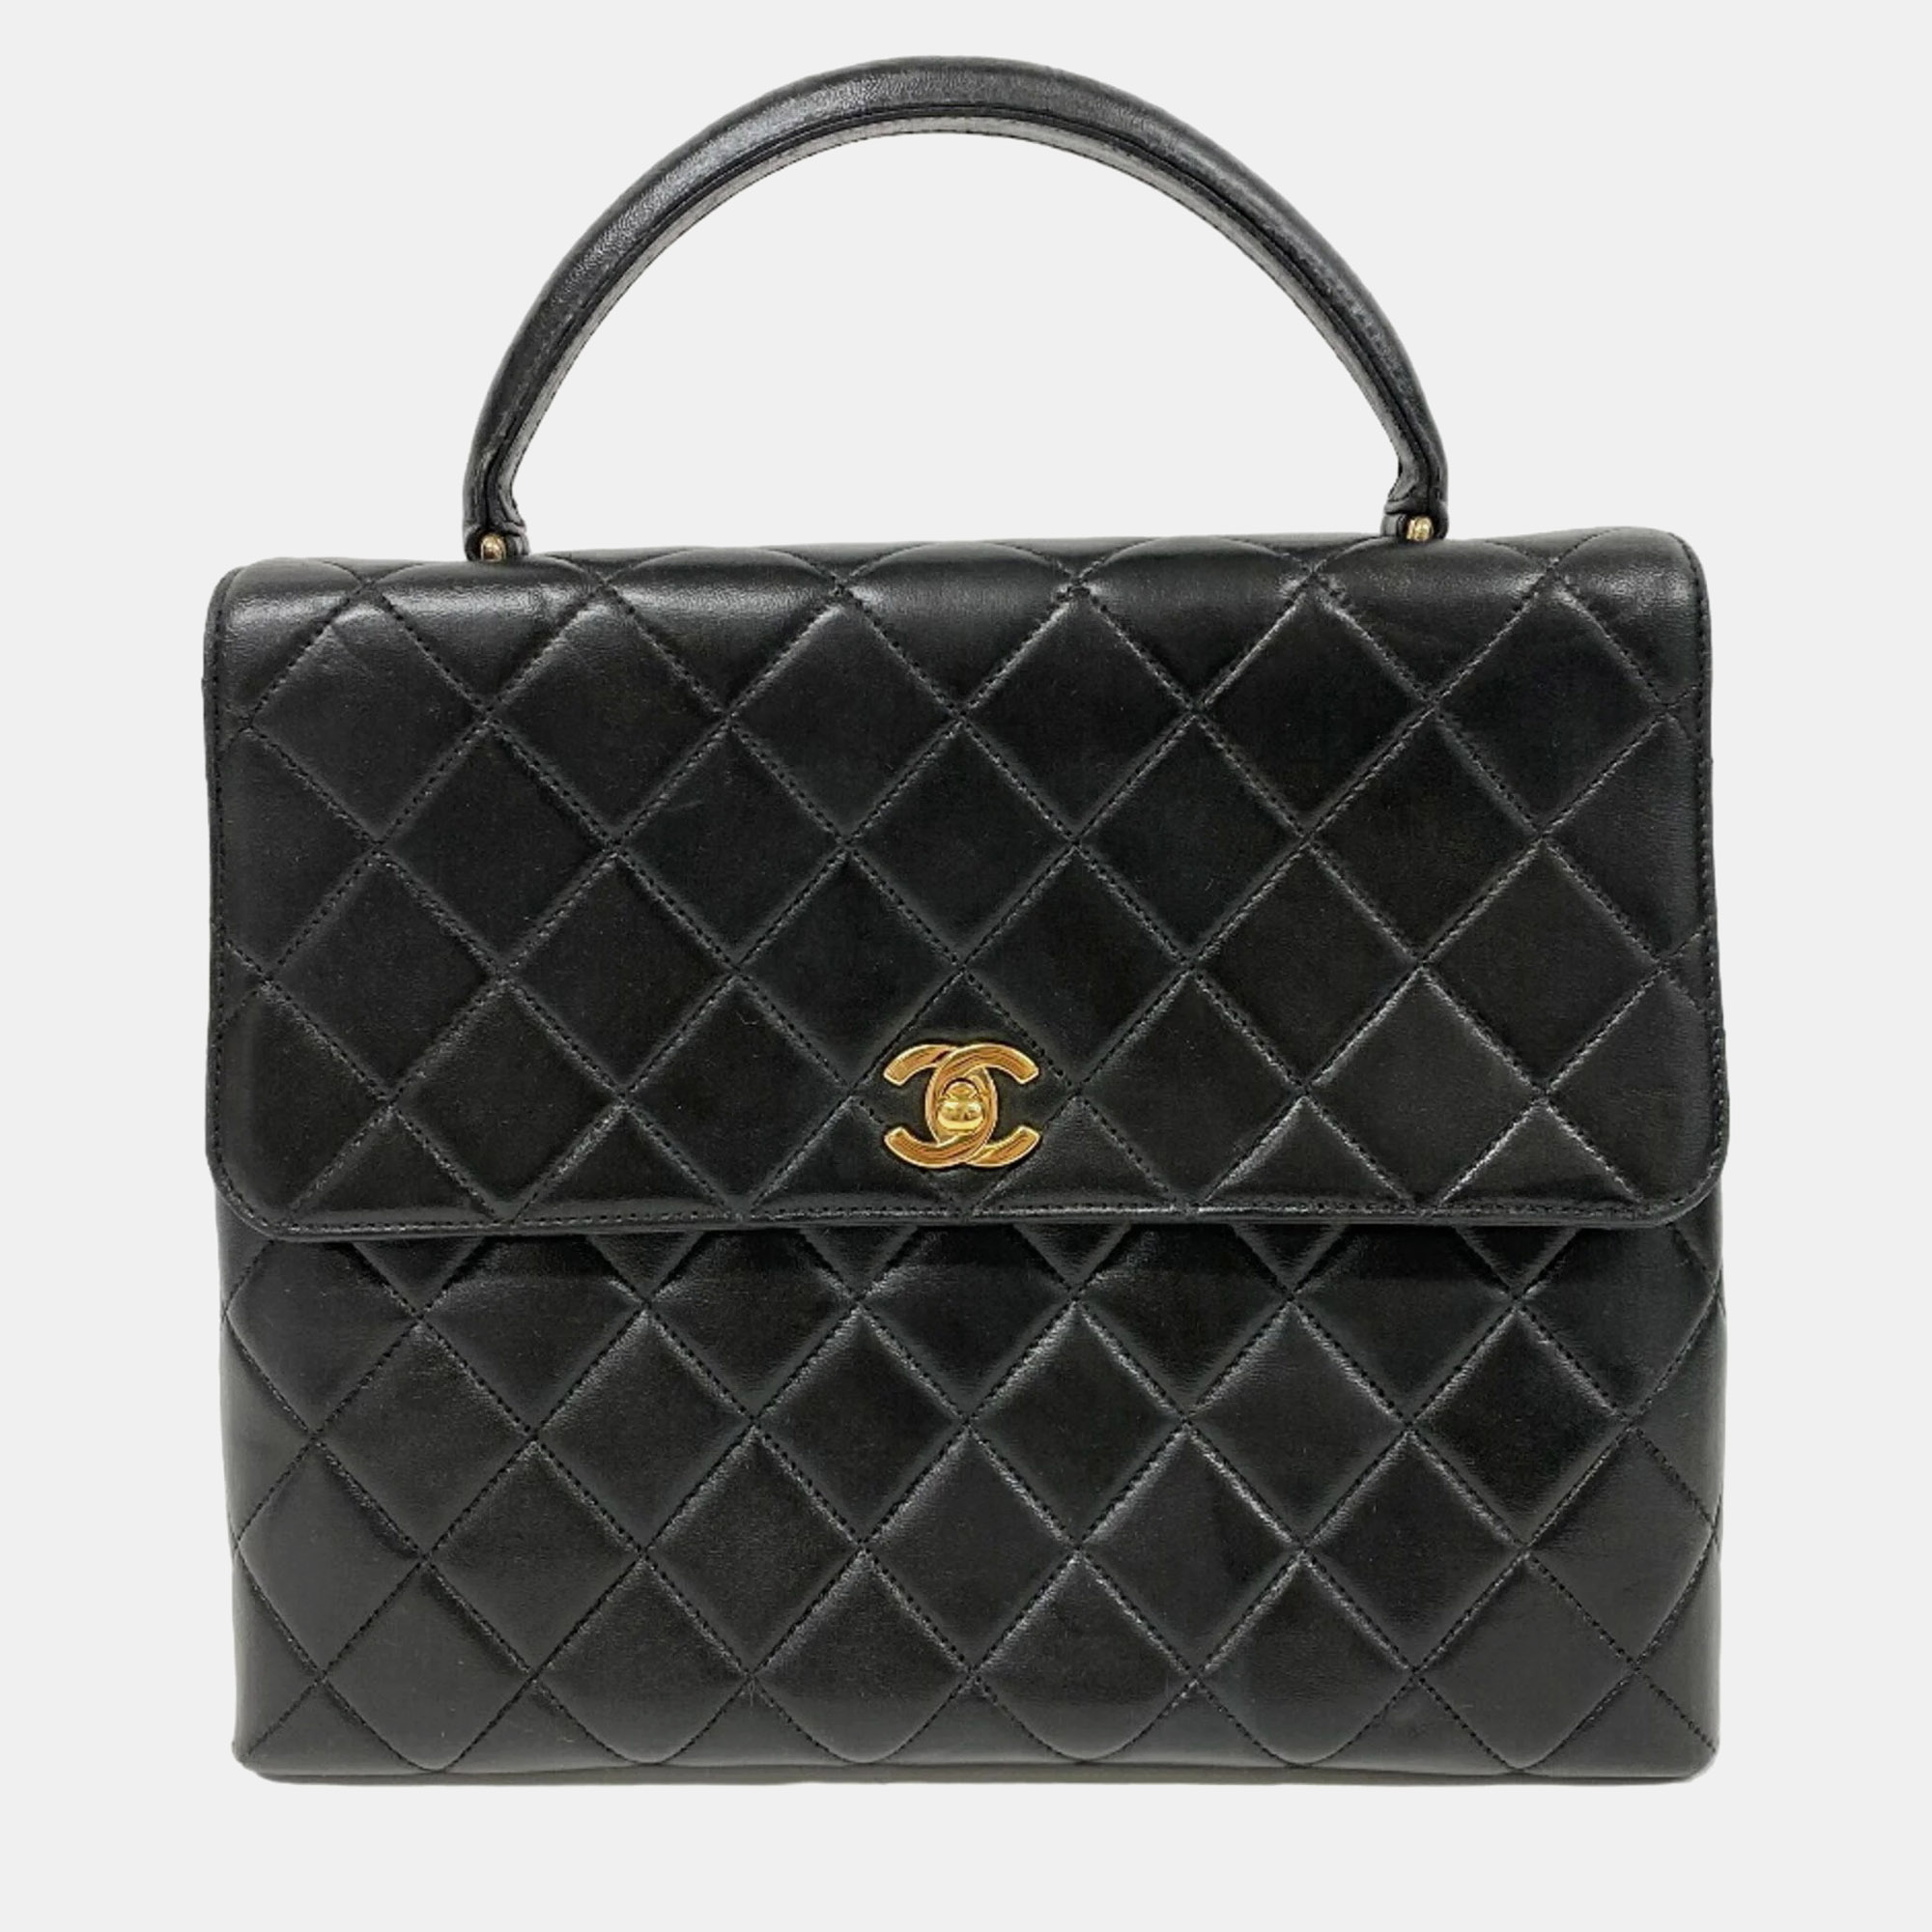 

Chanel Black Quilted Leather Kelly Top Handle Bag